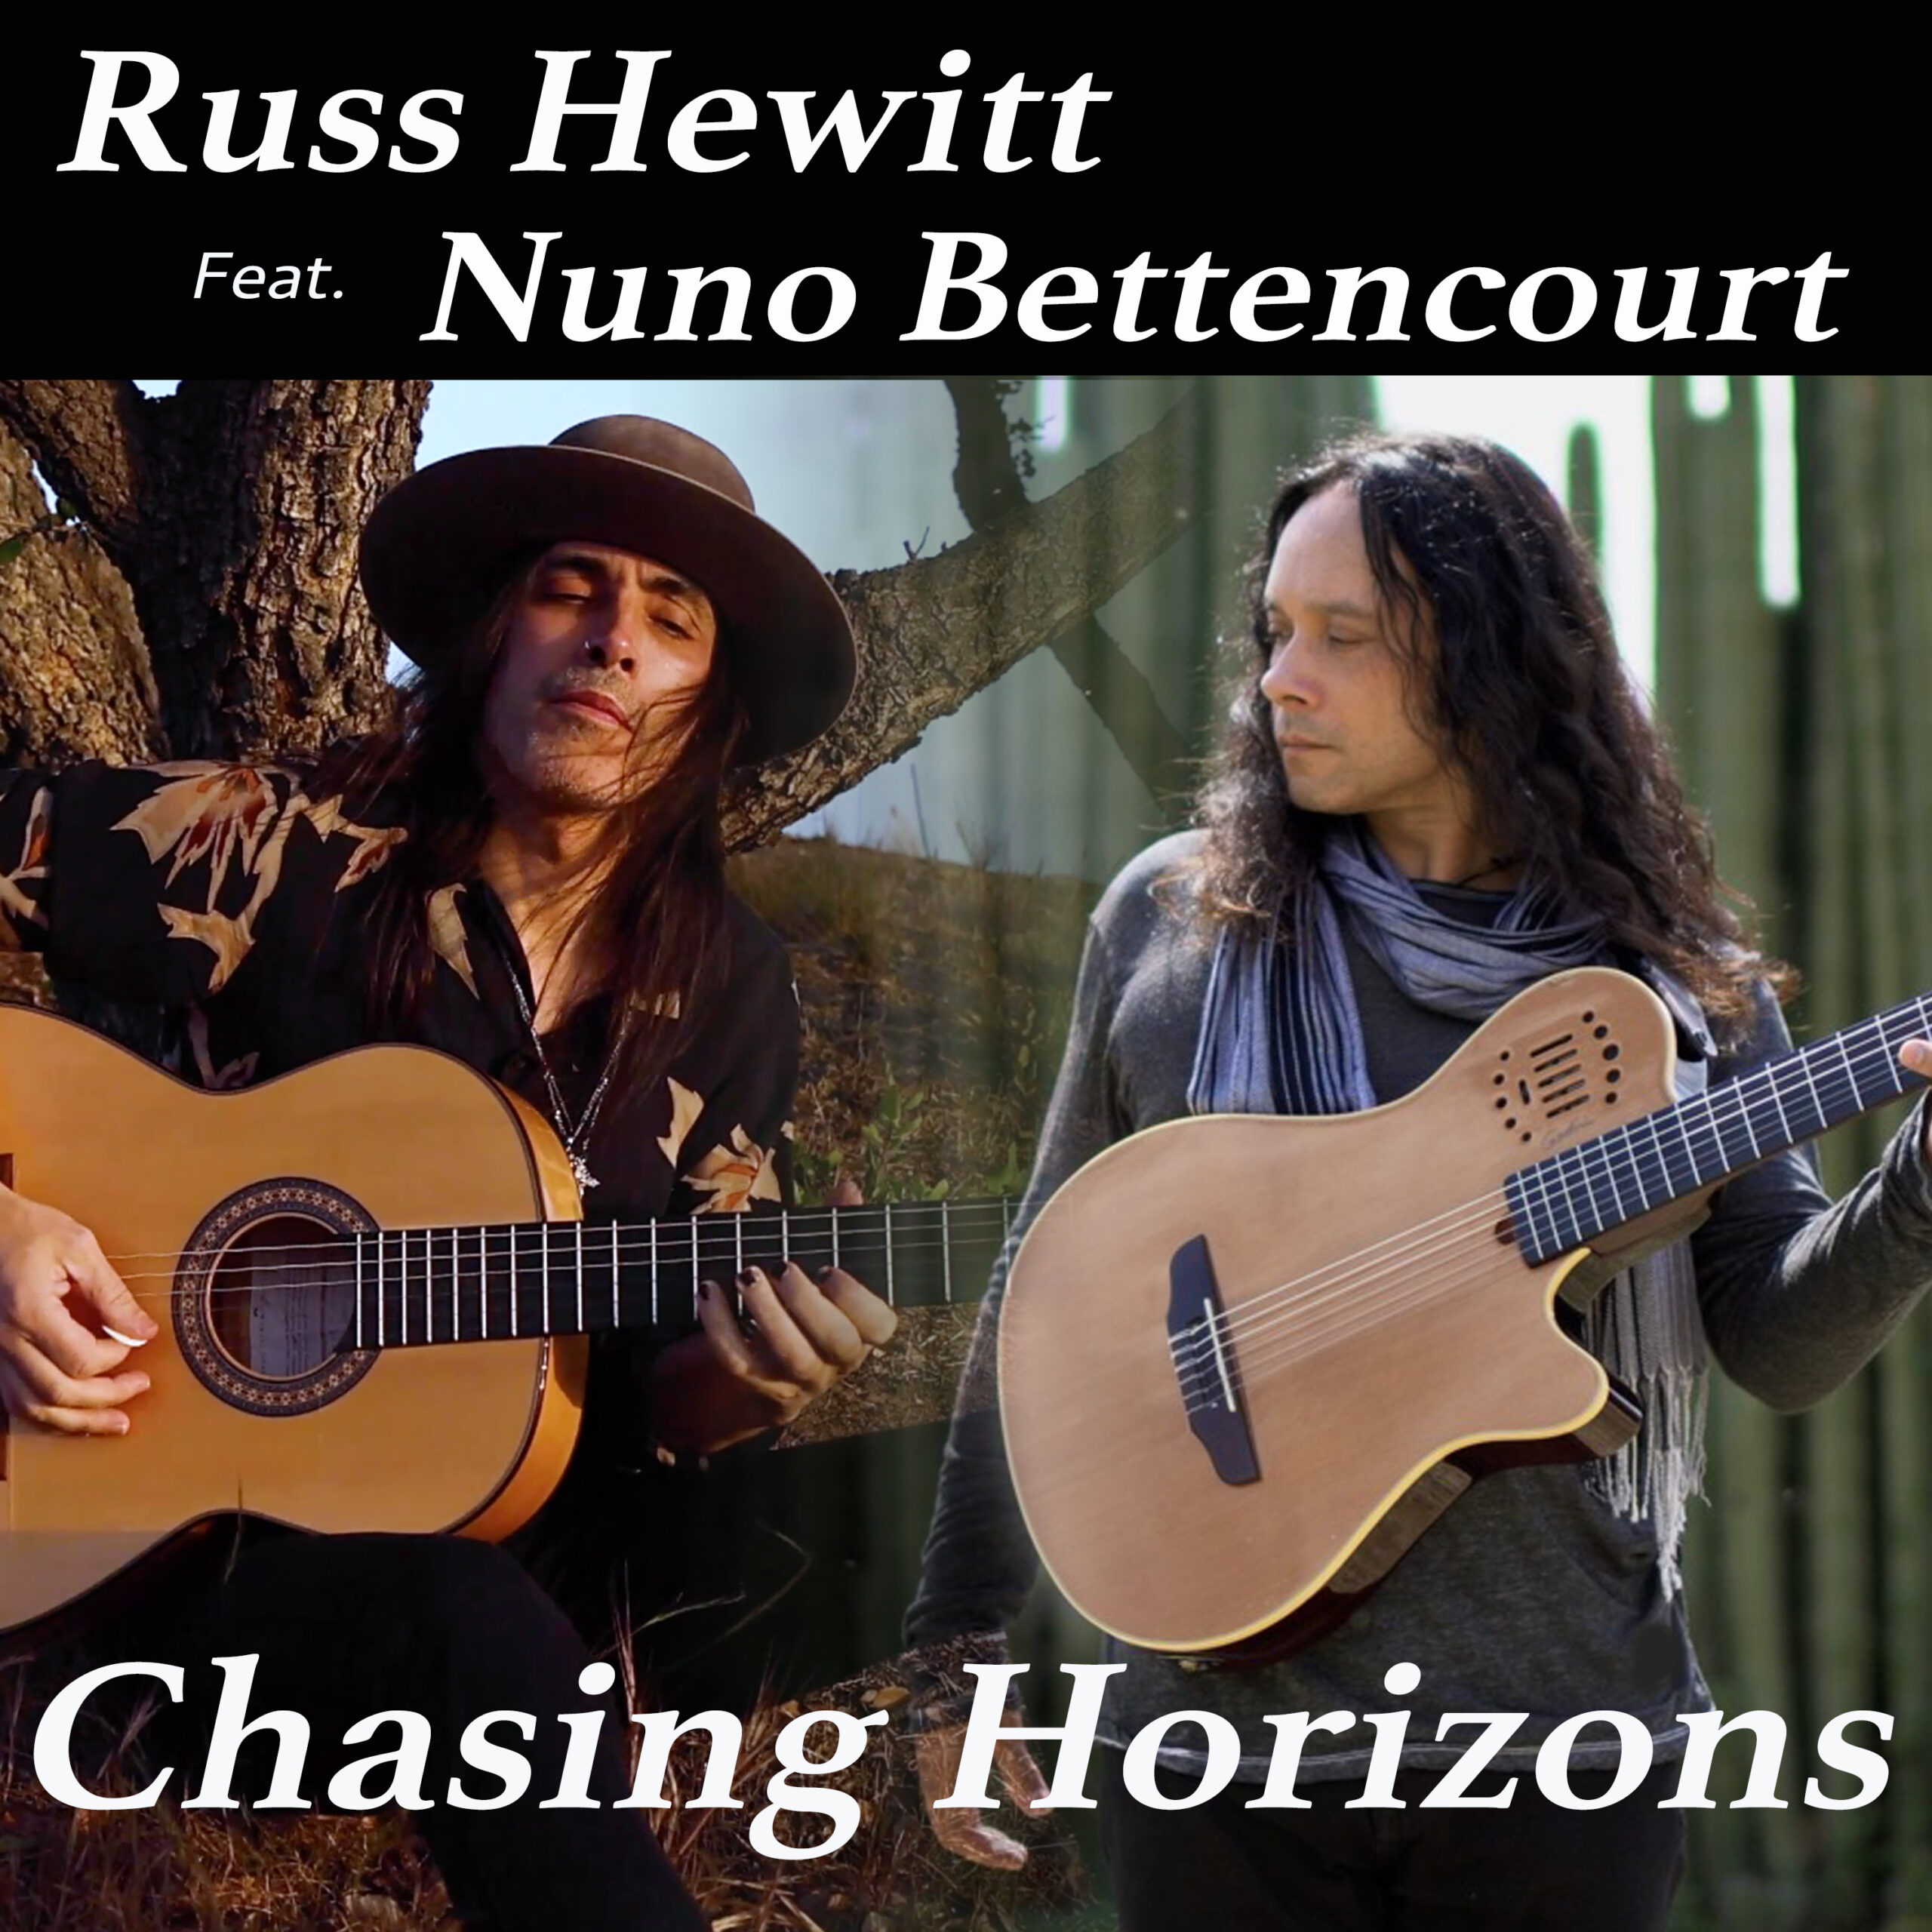 New single and video ‘Chasing Horizons’ featuring NUNO BETTENCOURT